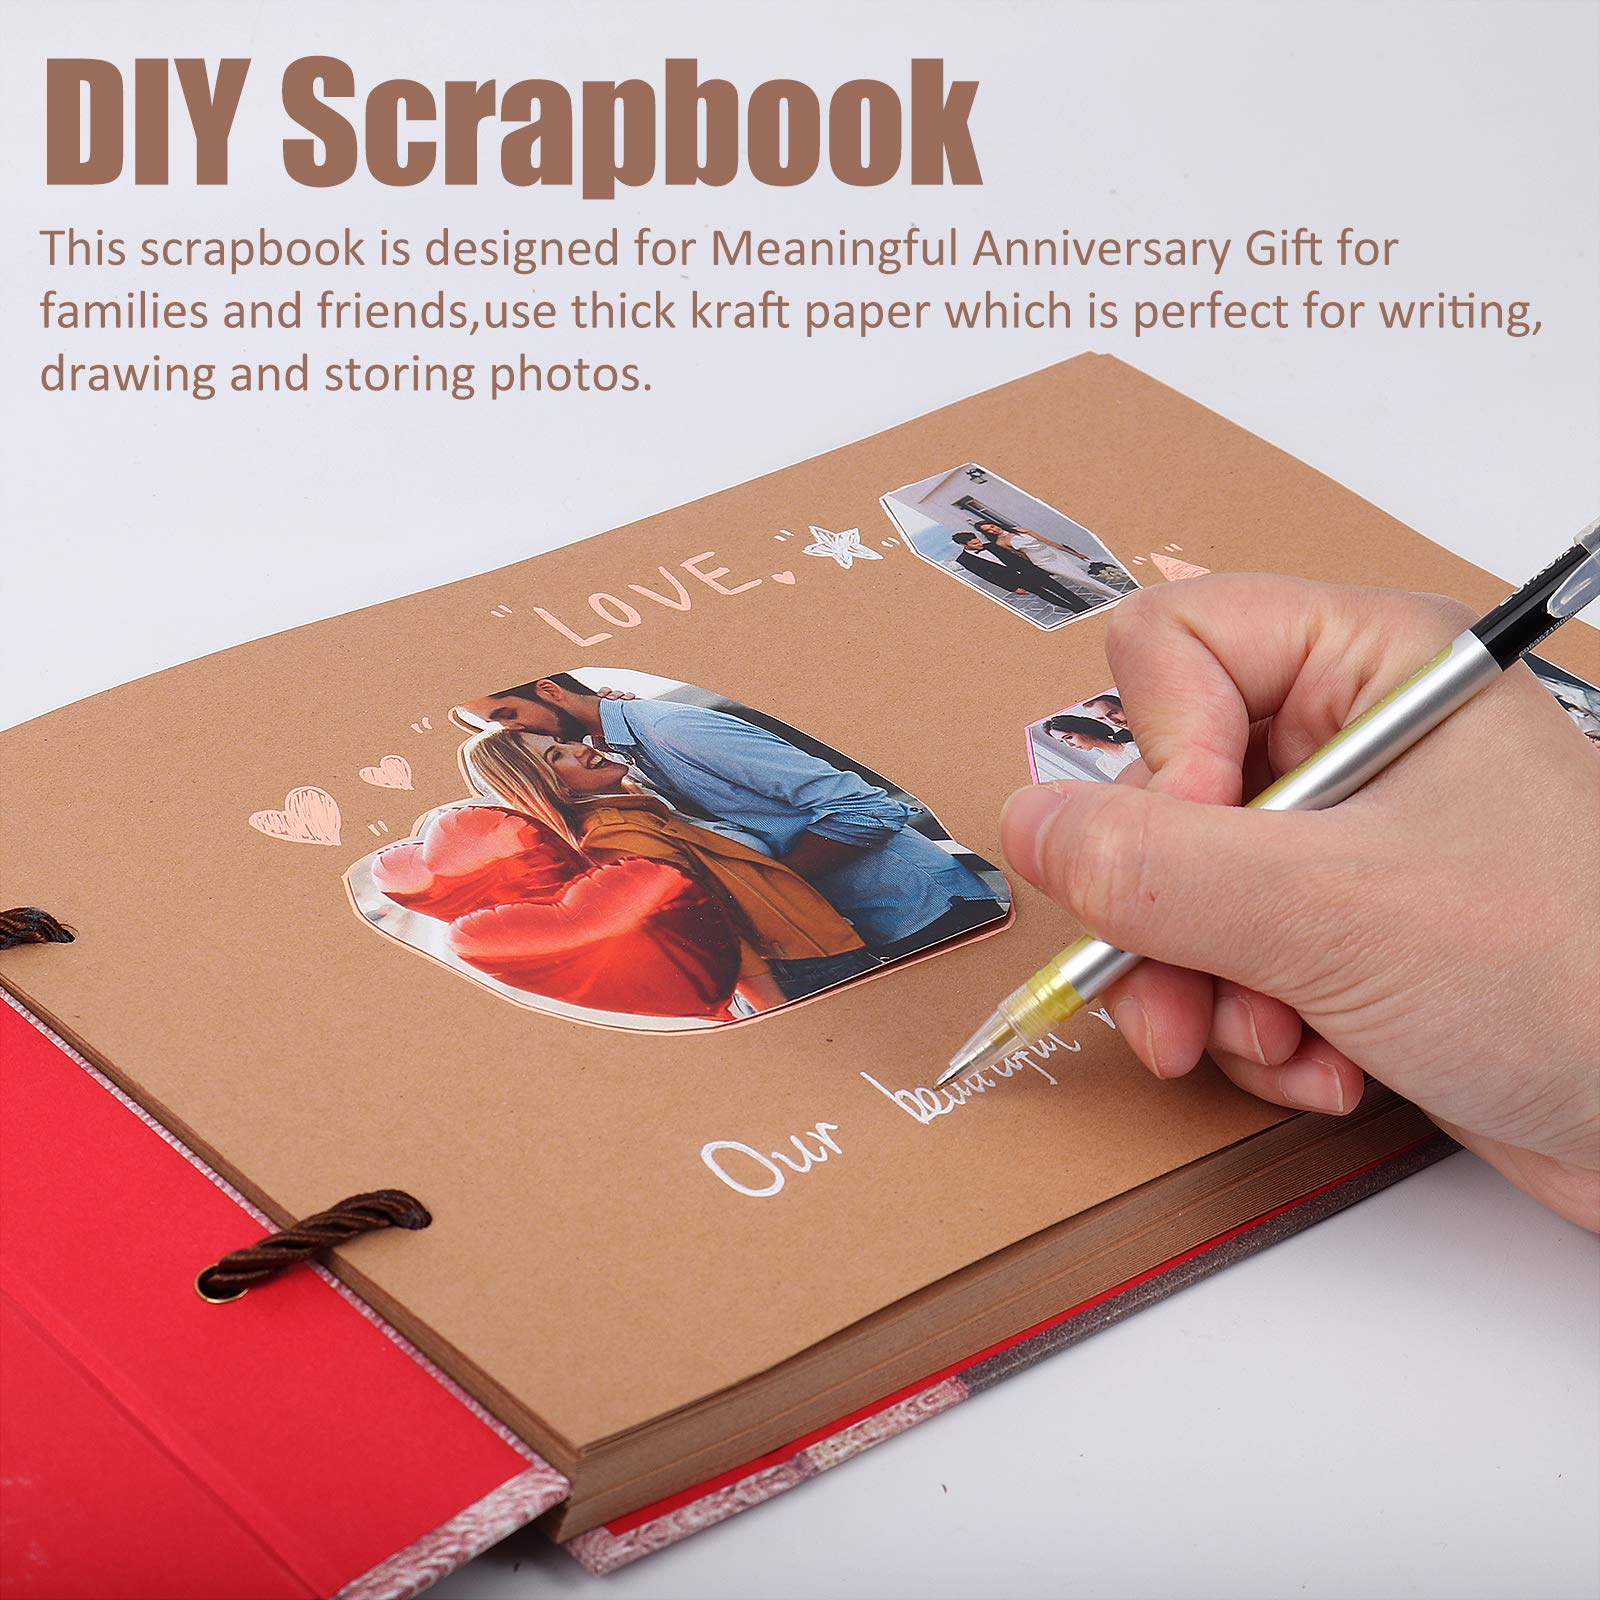 RECUTMS Our Adventure Book Scrapbook Pixar Up Handmade DIY Family Photo  Album Expandable 11.6x7.5 Inches 80 Pages with Storage Box DIY Accessories  Kit